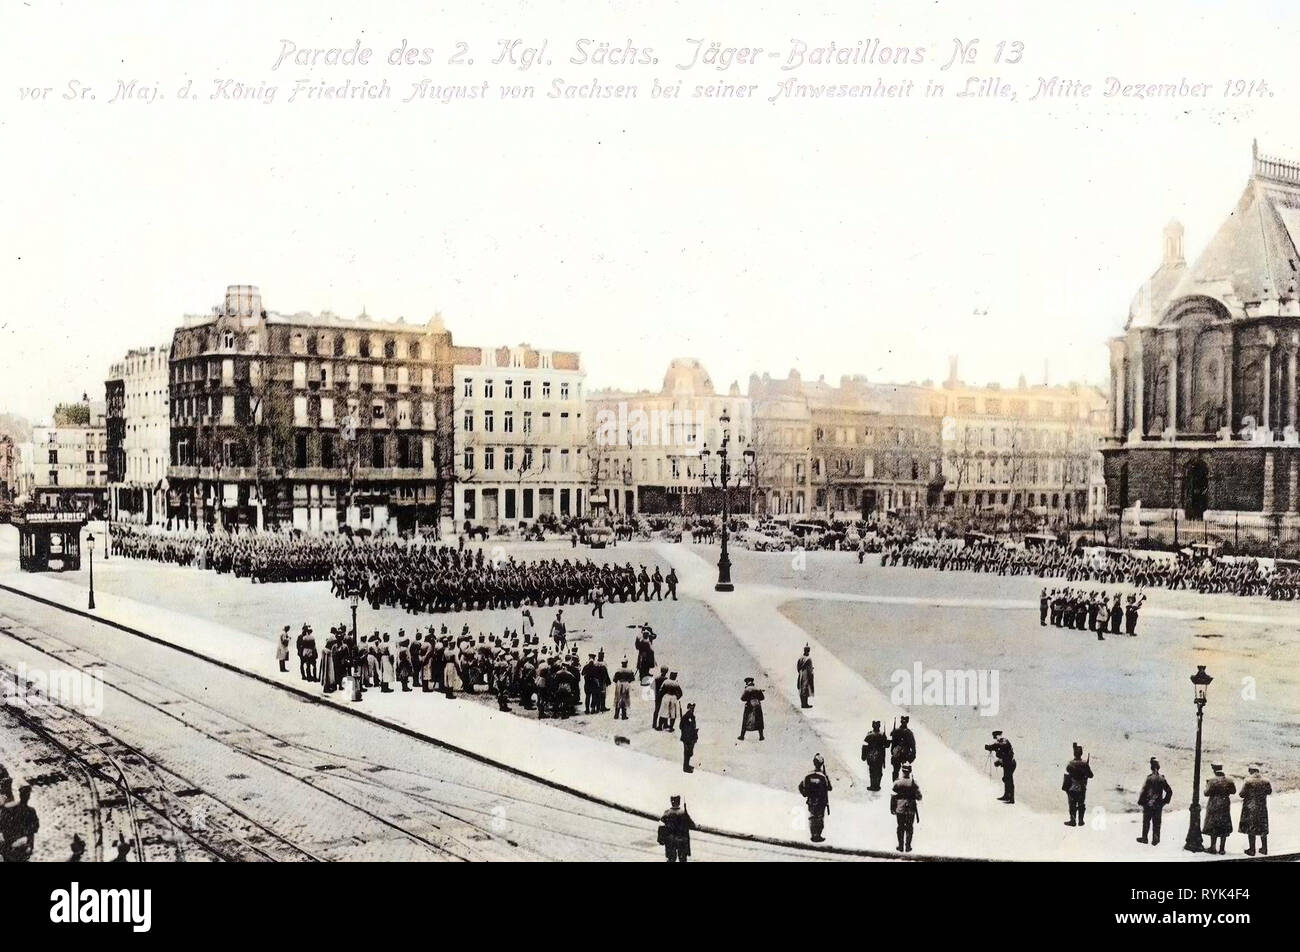 1914 in Lille, December in France, Frederick Augustus III of Saxony, 2. Königlich Sächsisches Jäger-Bataillon Nr. 13, Buildings in Lille, Military parades in France, 1914, Nord, Lille, 2. Königlich Sächsisches Jäger, Bataillon Nr. 13, Parade in Lille Dezember 1914, Germany Stock Photo